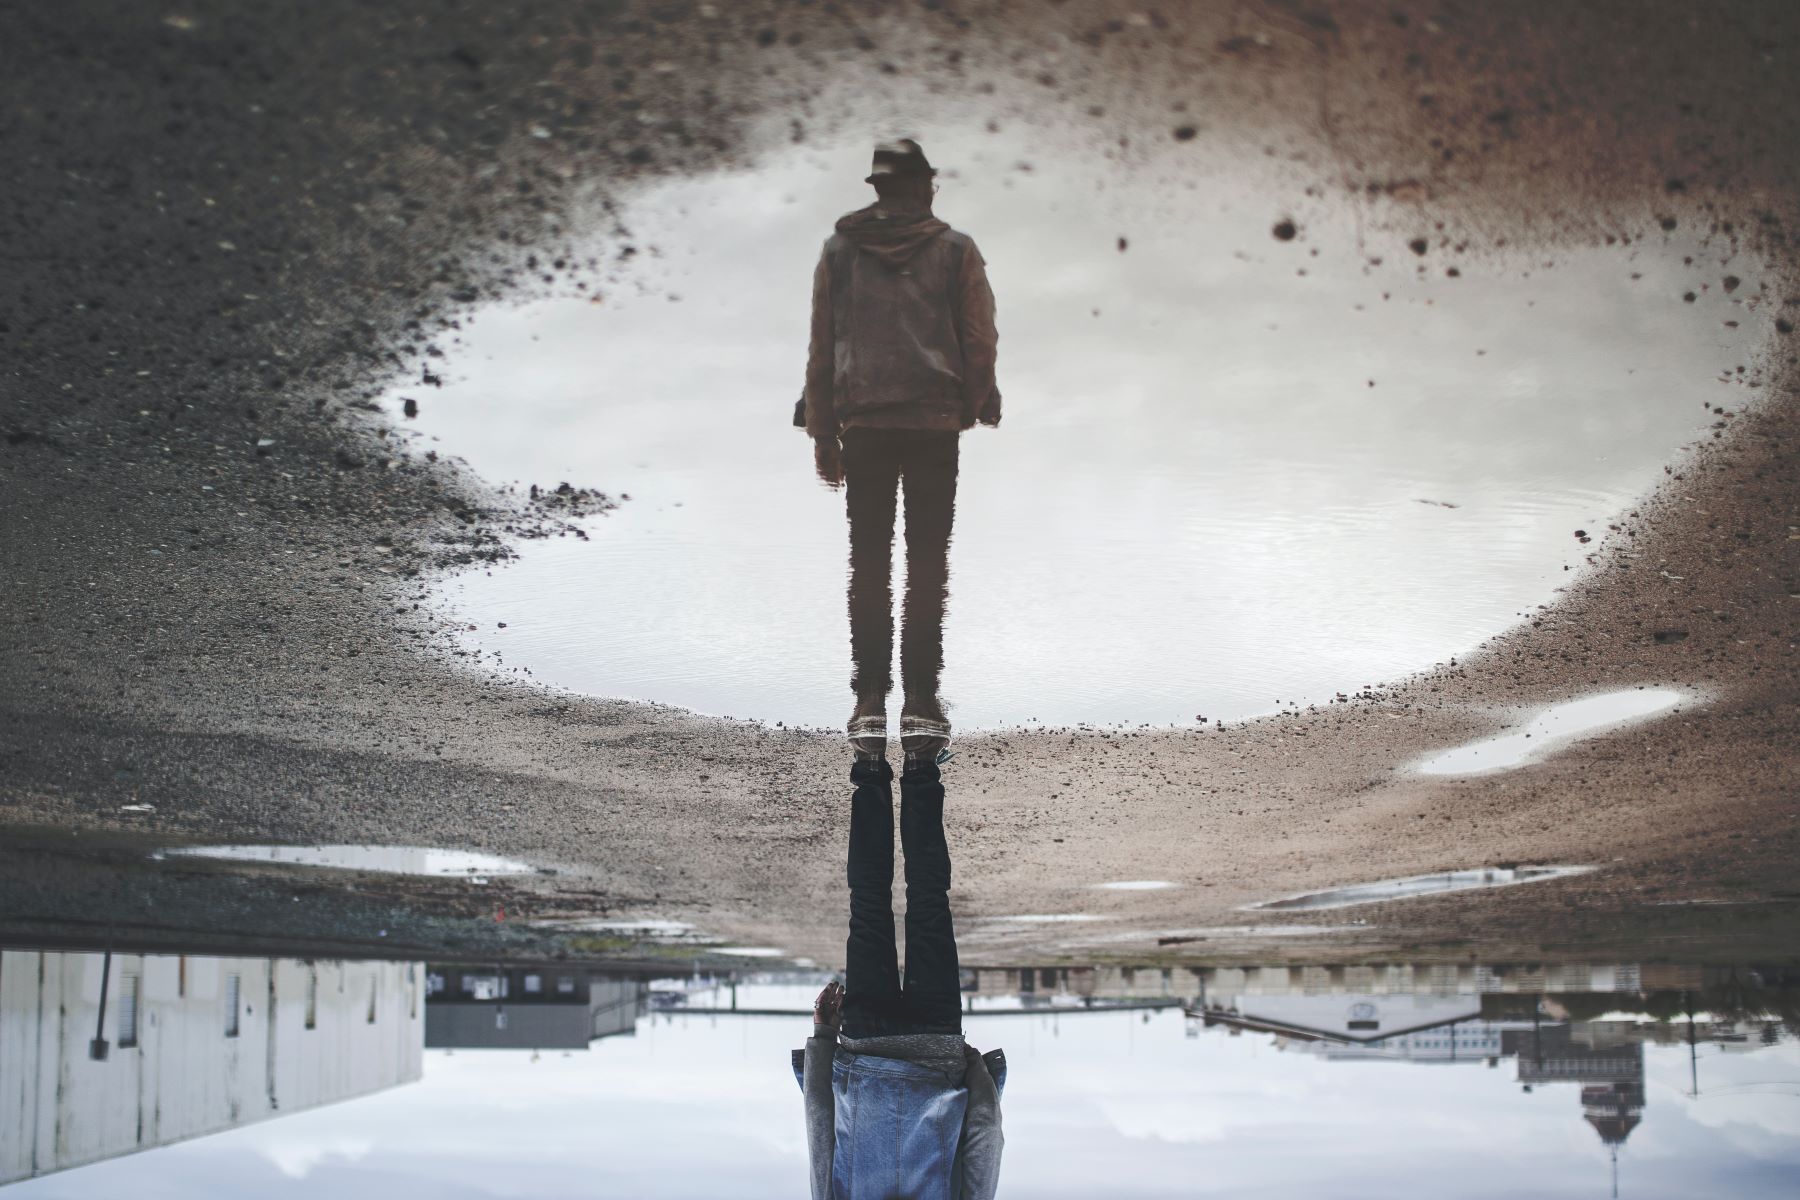 A man and his reflection in a puddle but upside down